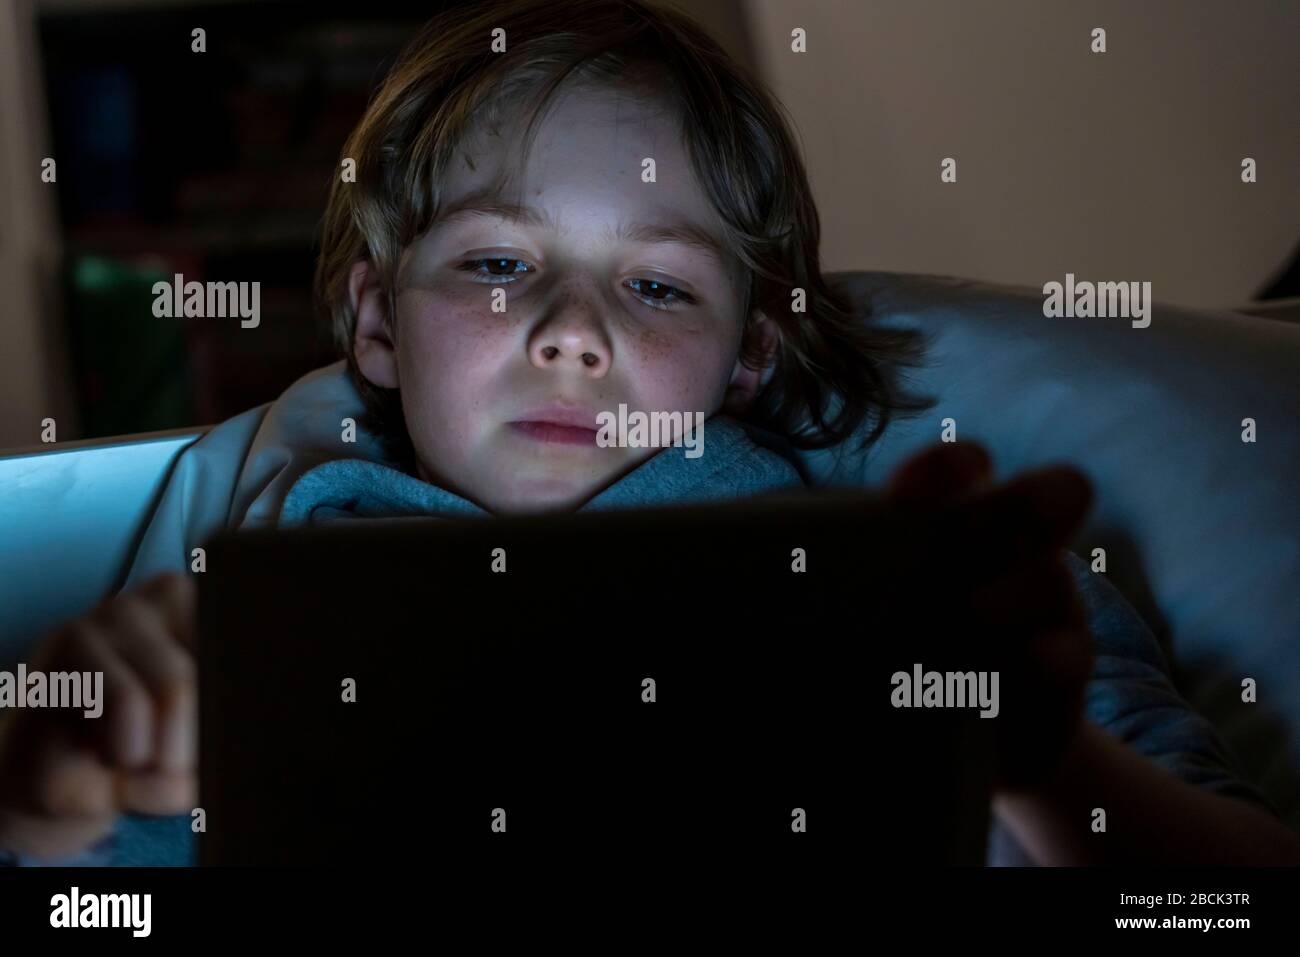 A boy plays computer games on a tablet PC, in his Children's room, on the bed, Stock Photo